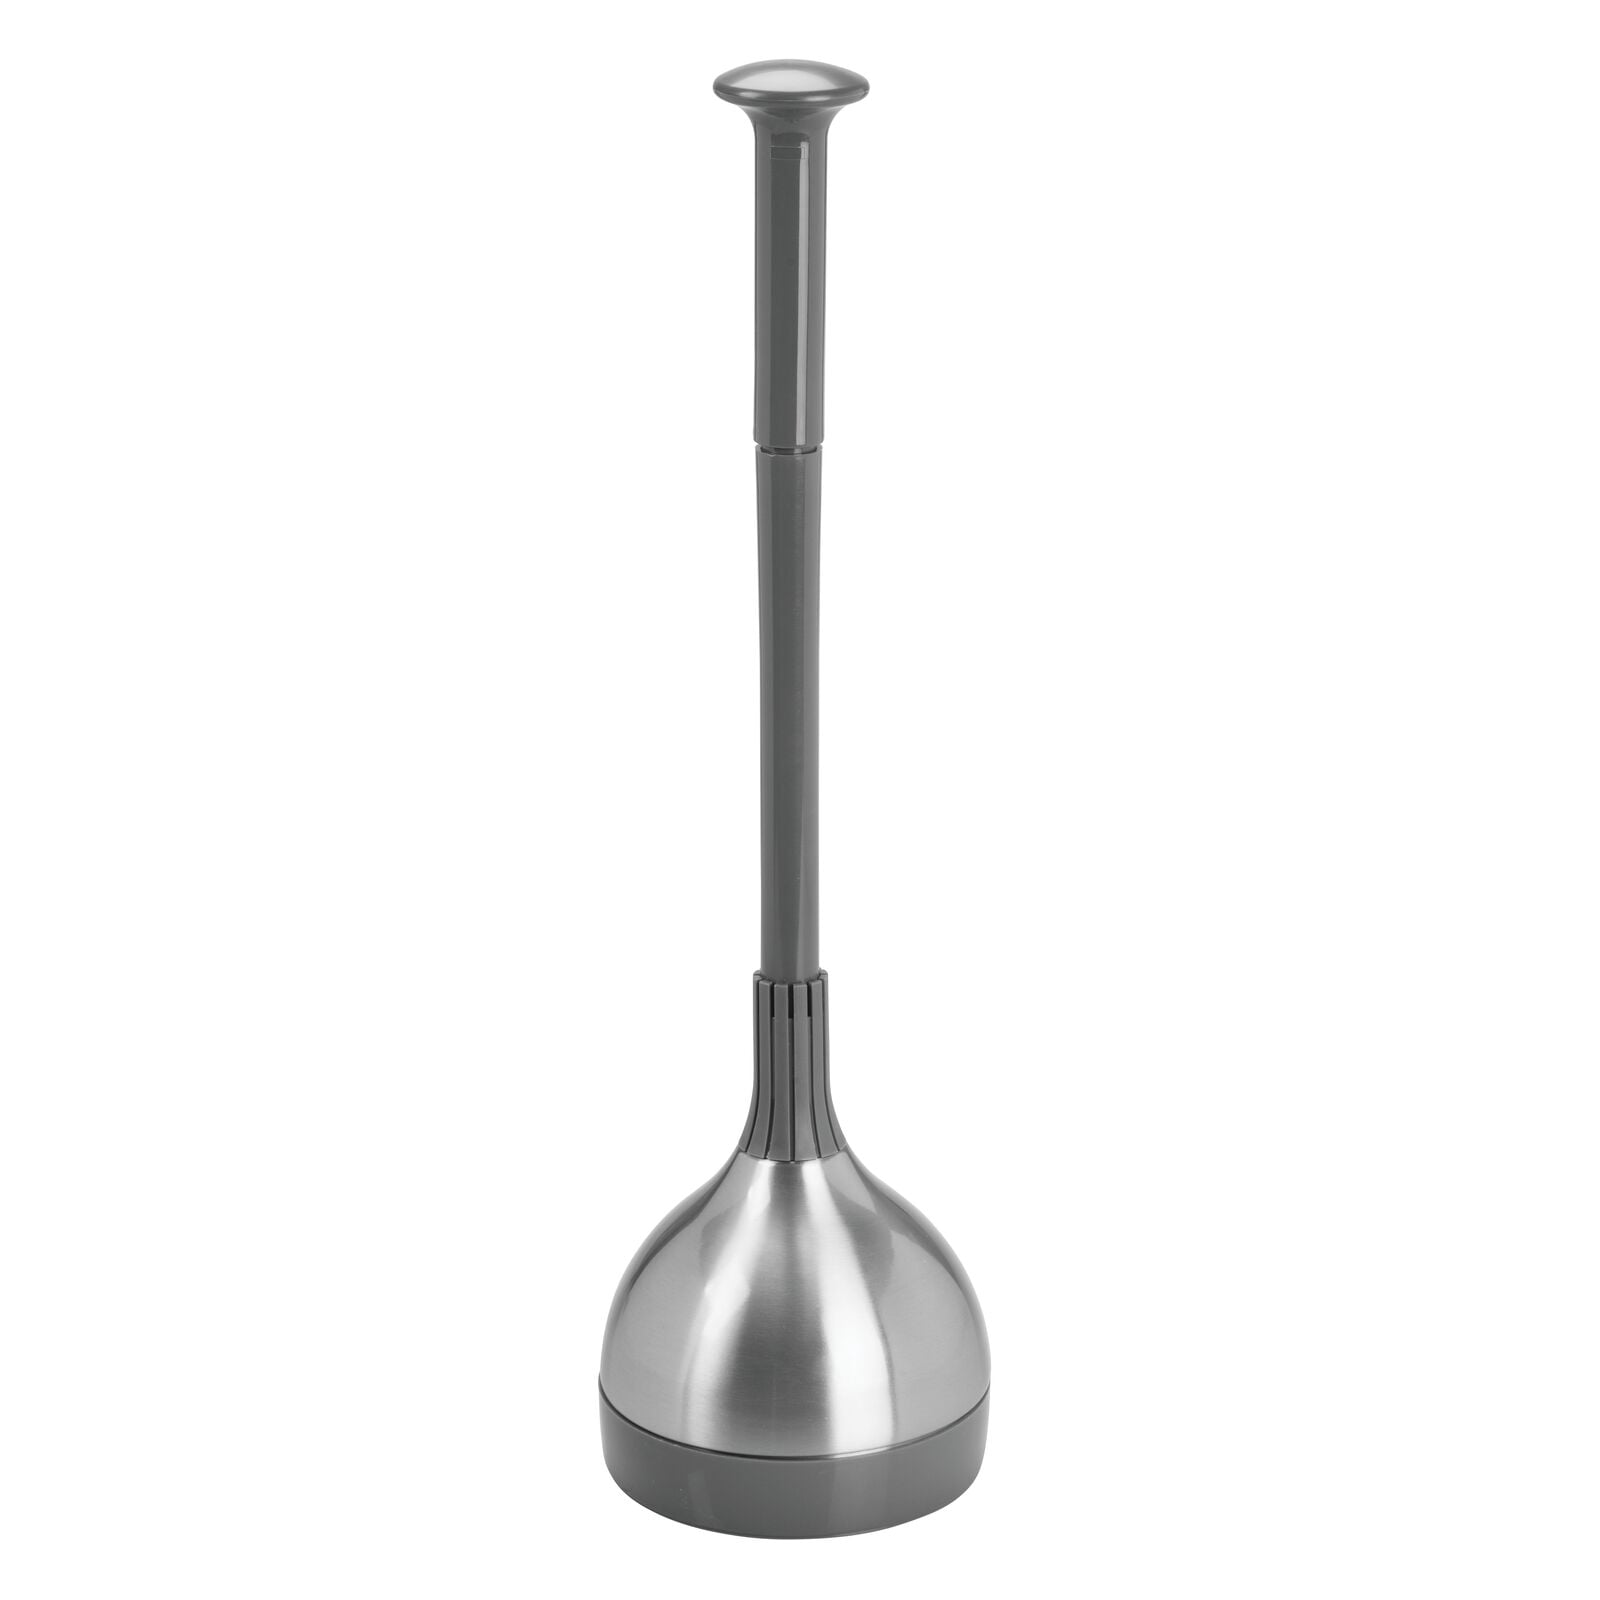 mDesign Bathroom Toilet Bowl Plunger and Cover Black/Brushed Stainless Steel 